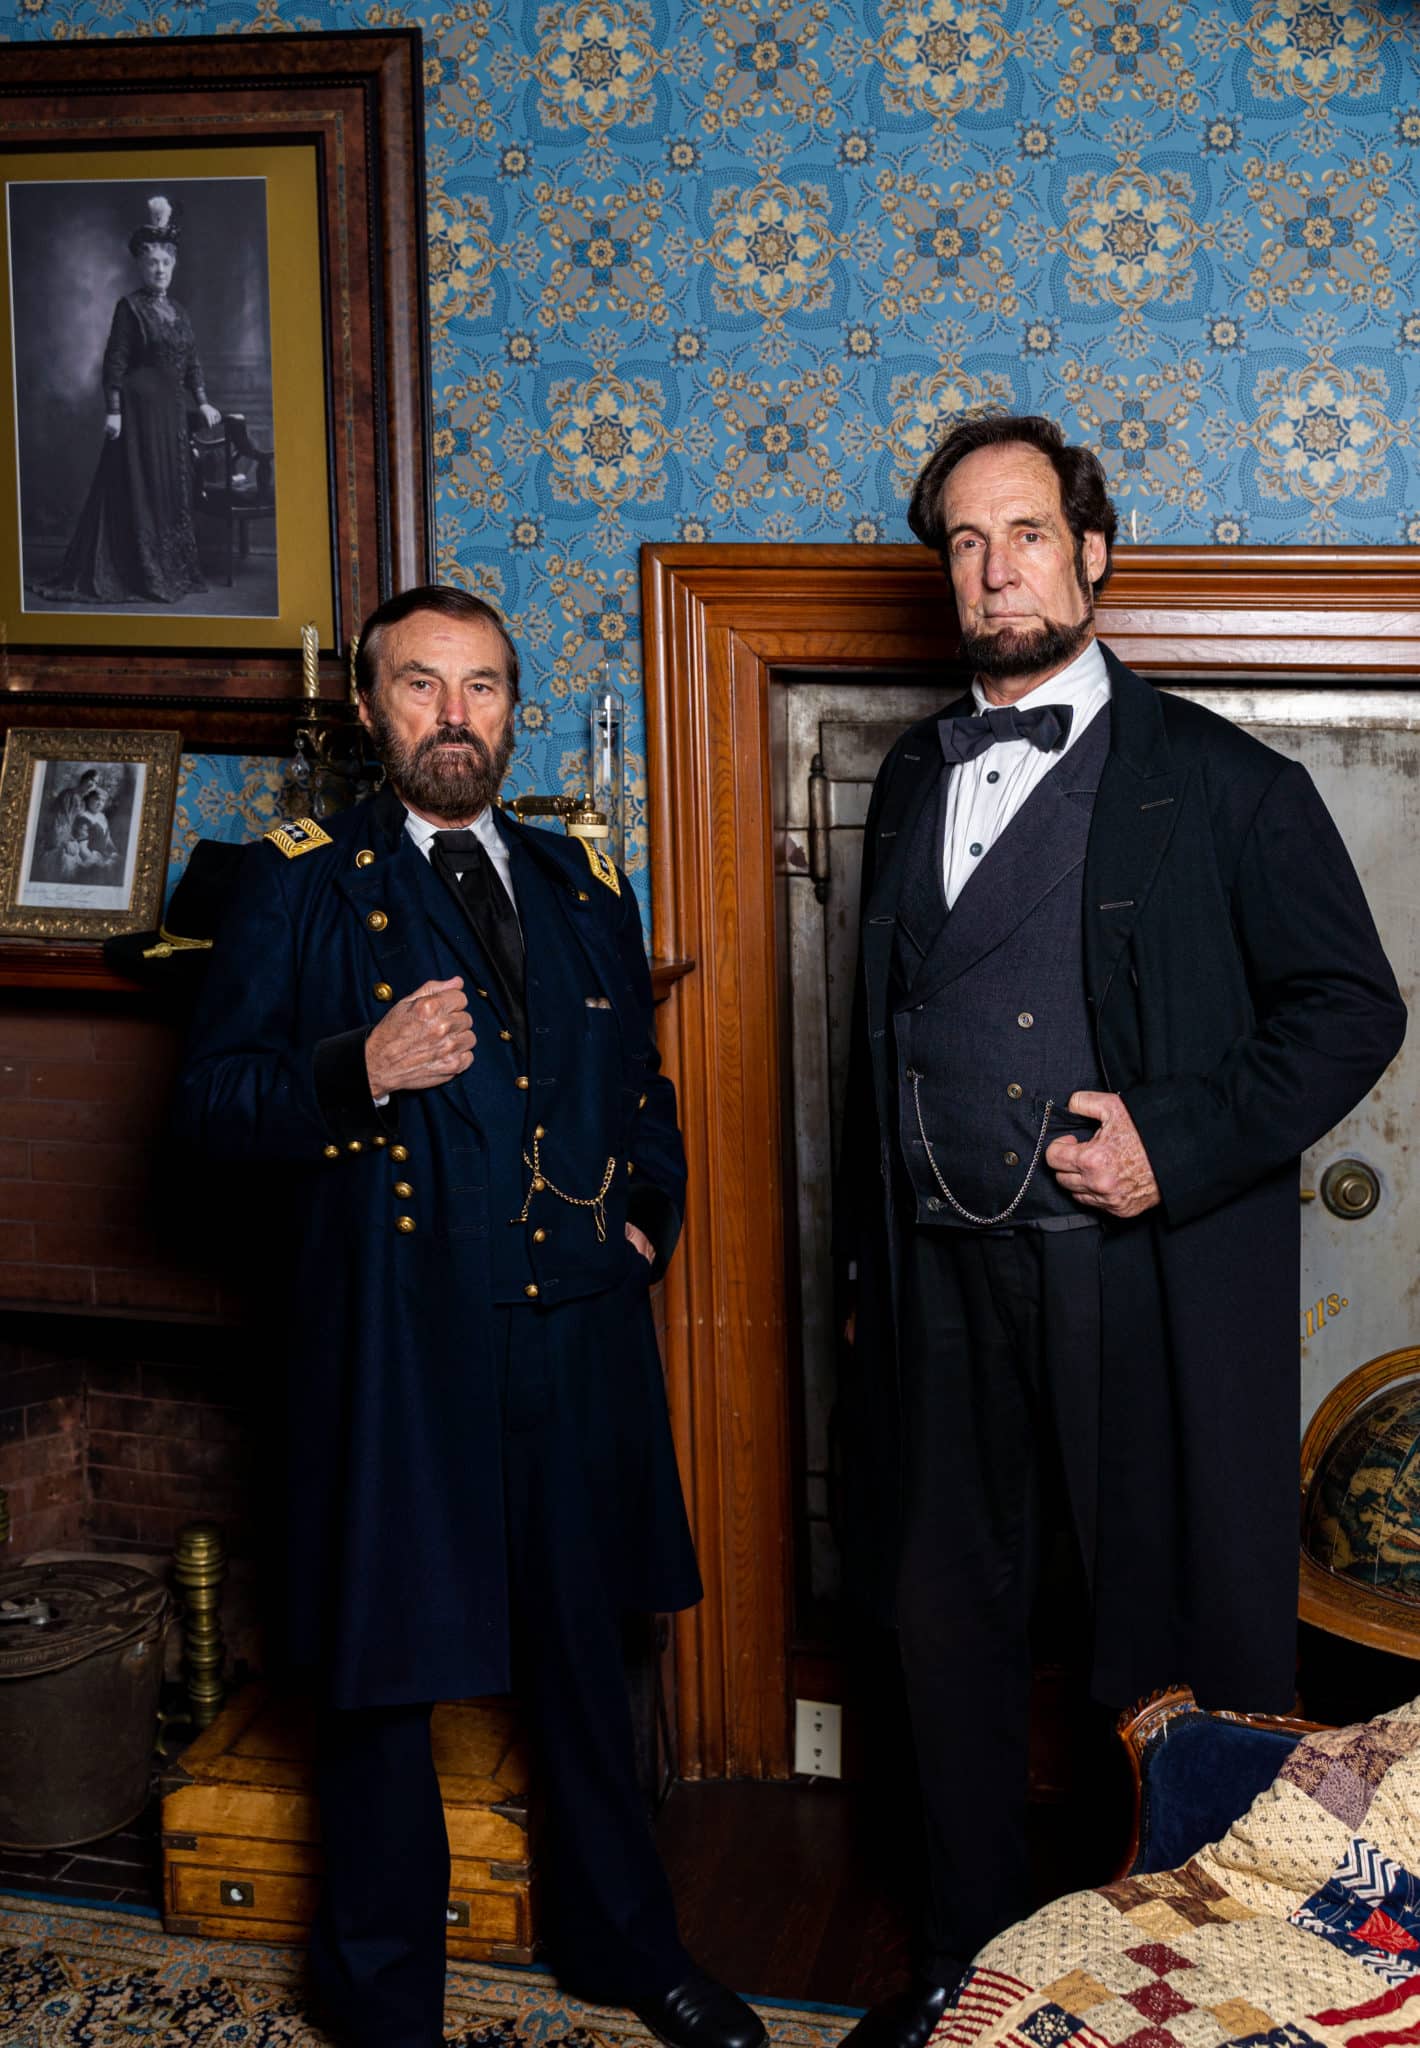 two men portraying US presidents Lincoln and Grant stand in front of a built-in wall safe